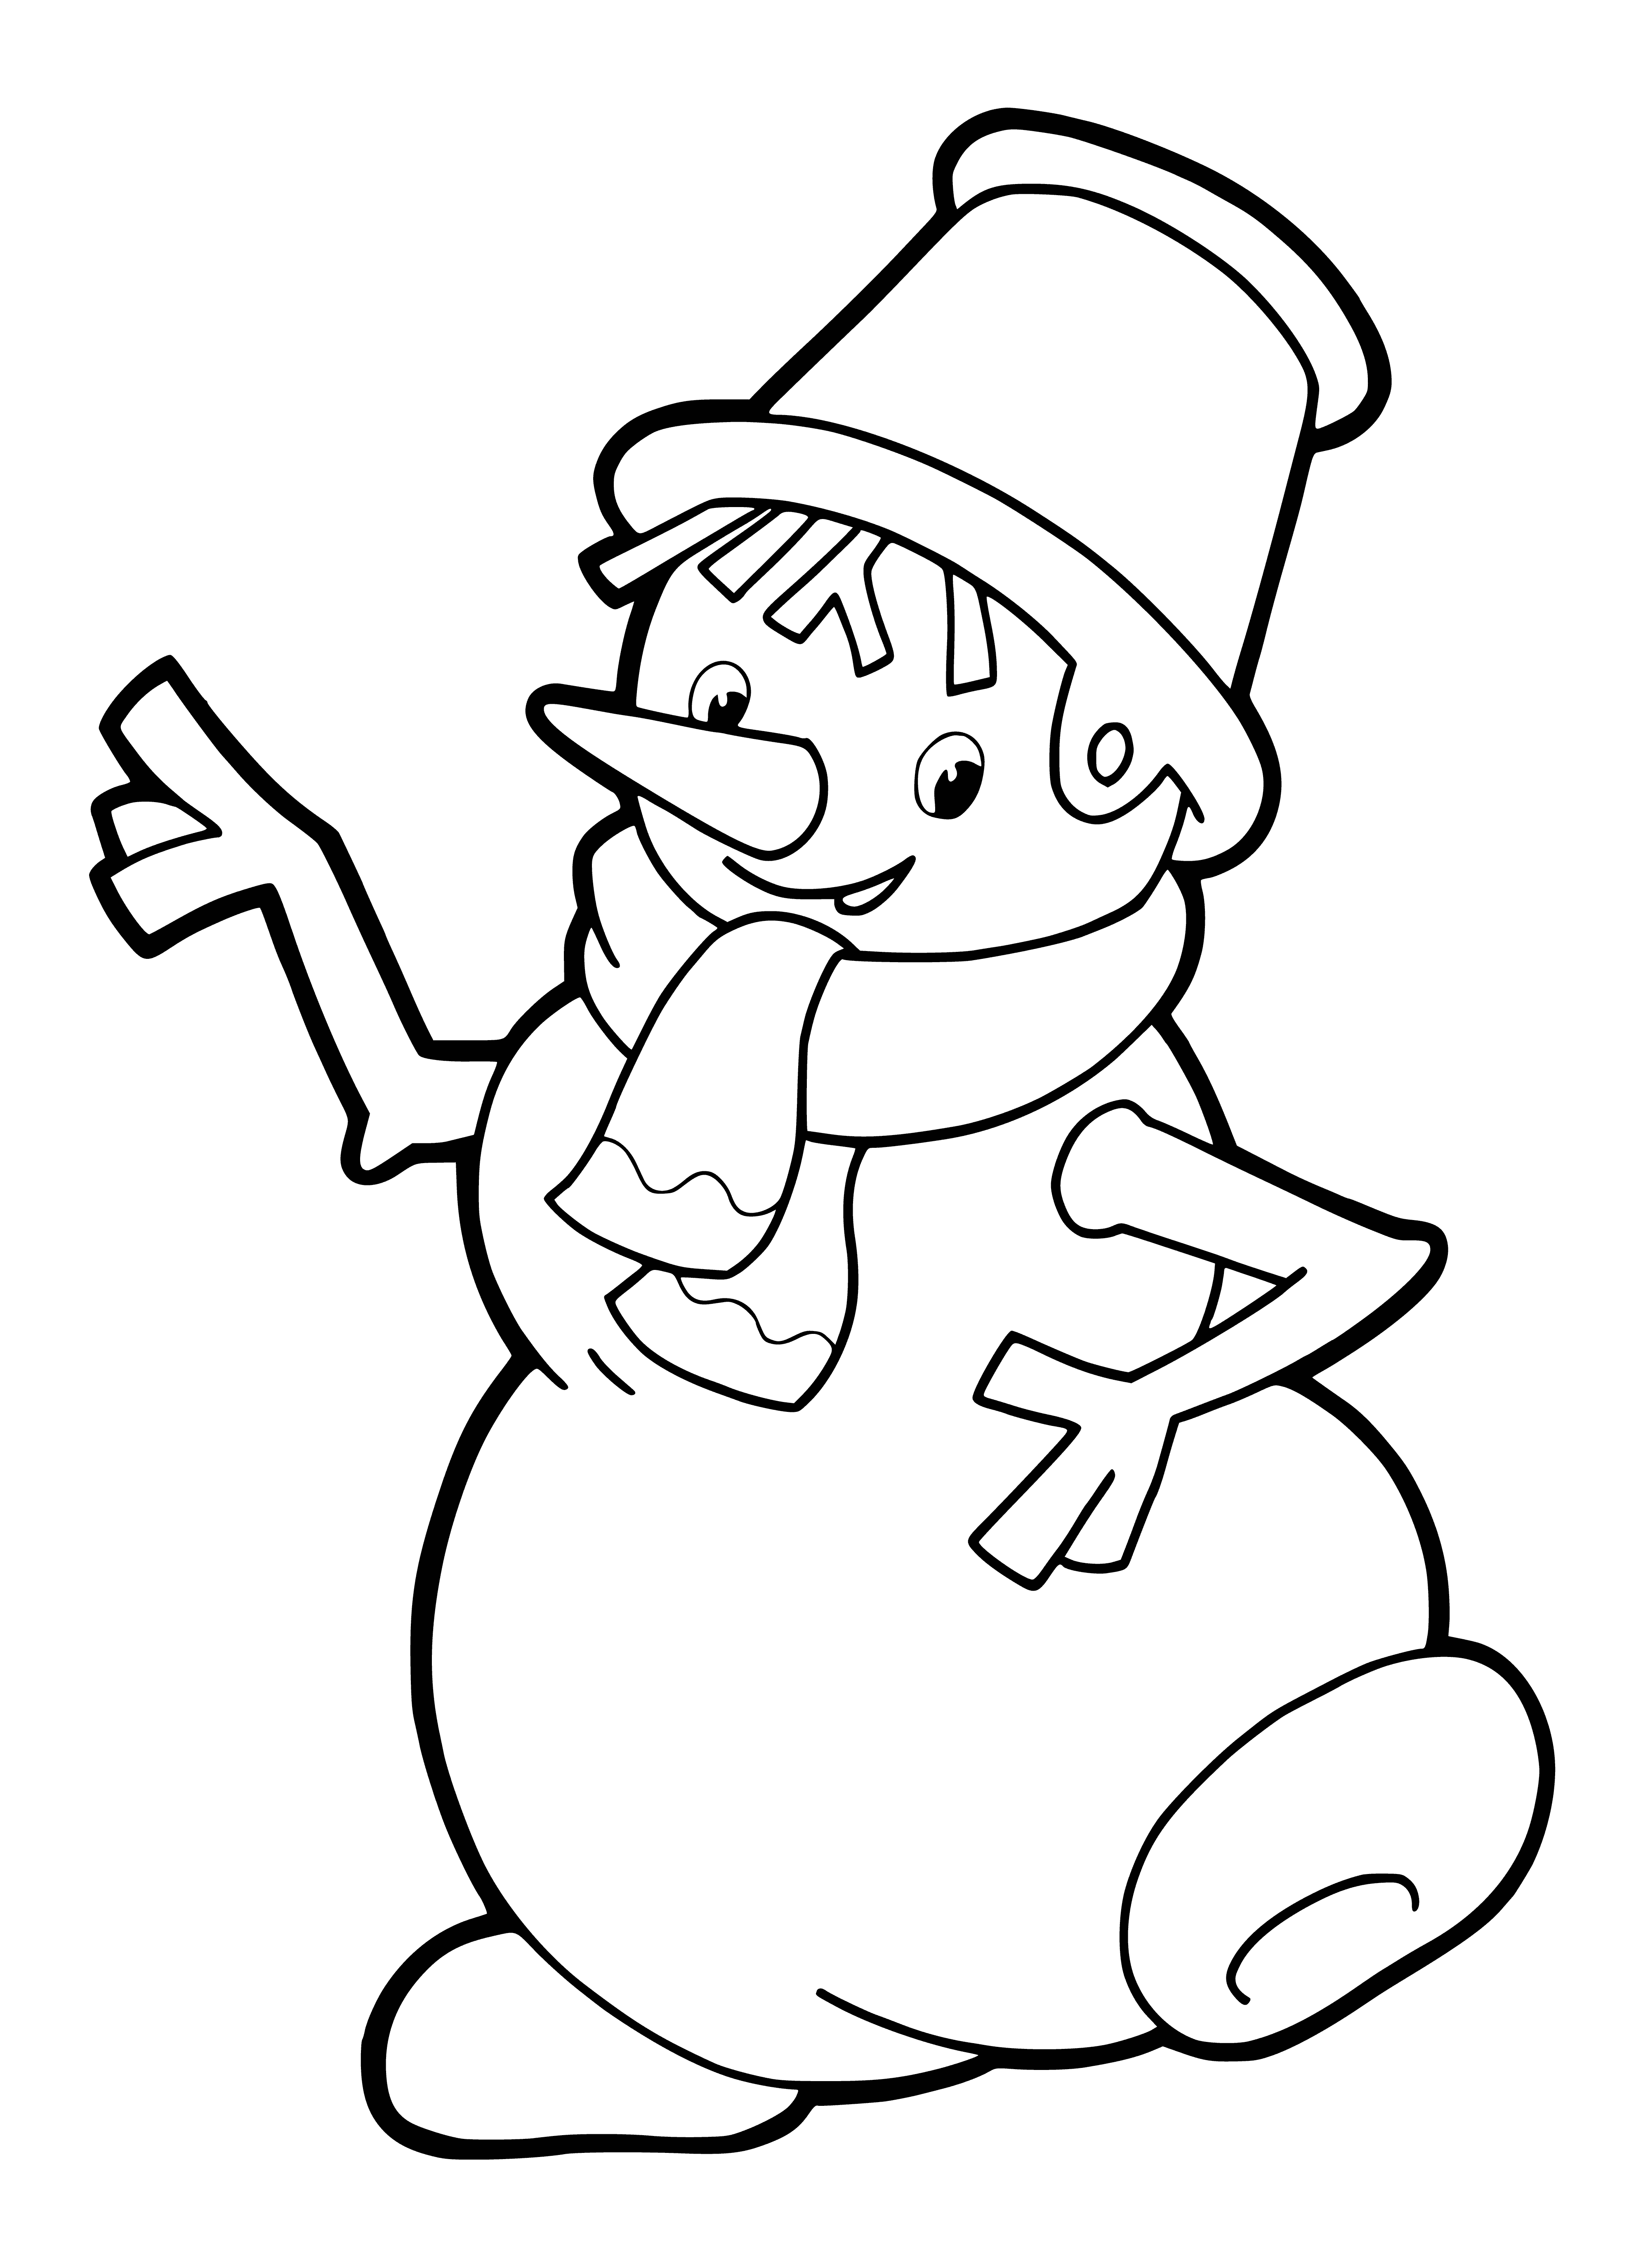 coloring page: Snowmen "dancing" & "playing trumpet" in a circle with hats & holding hands.